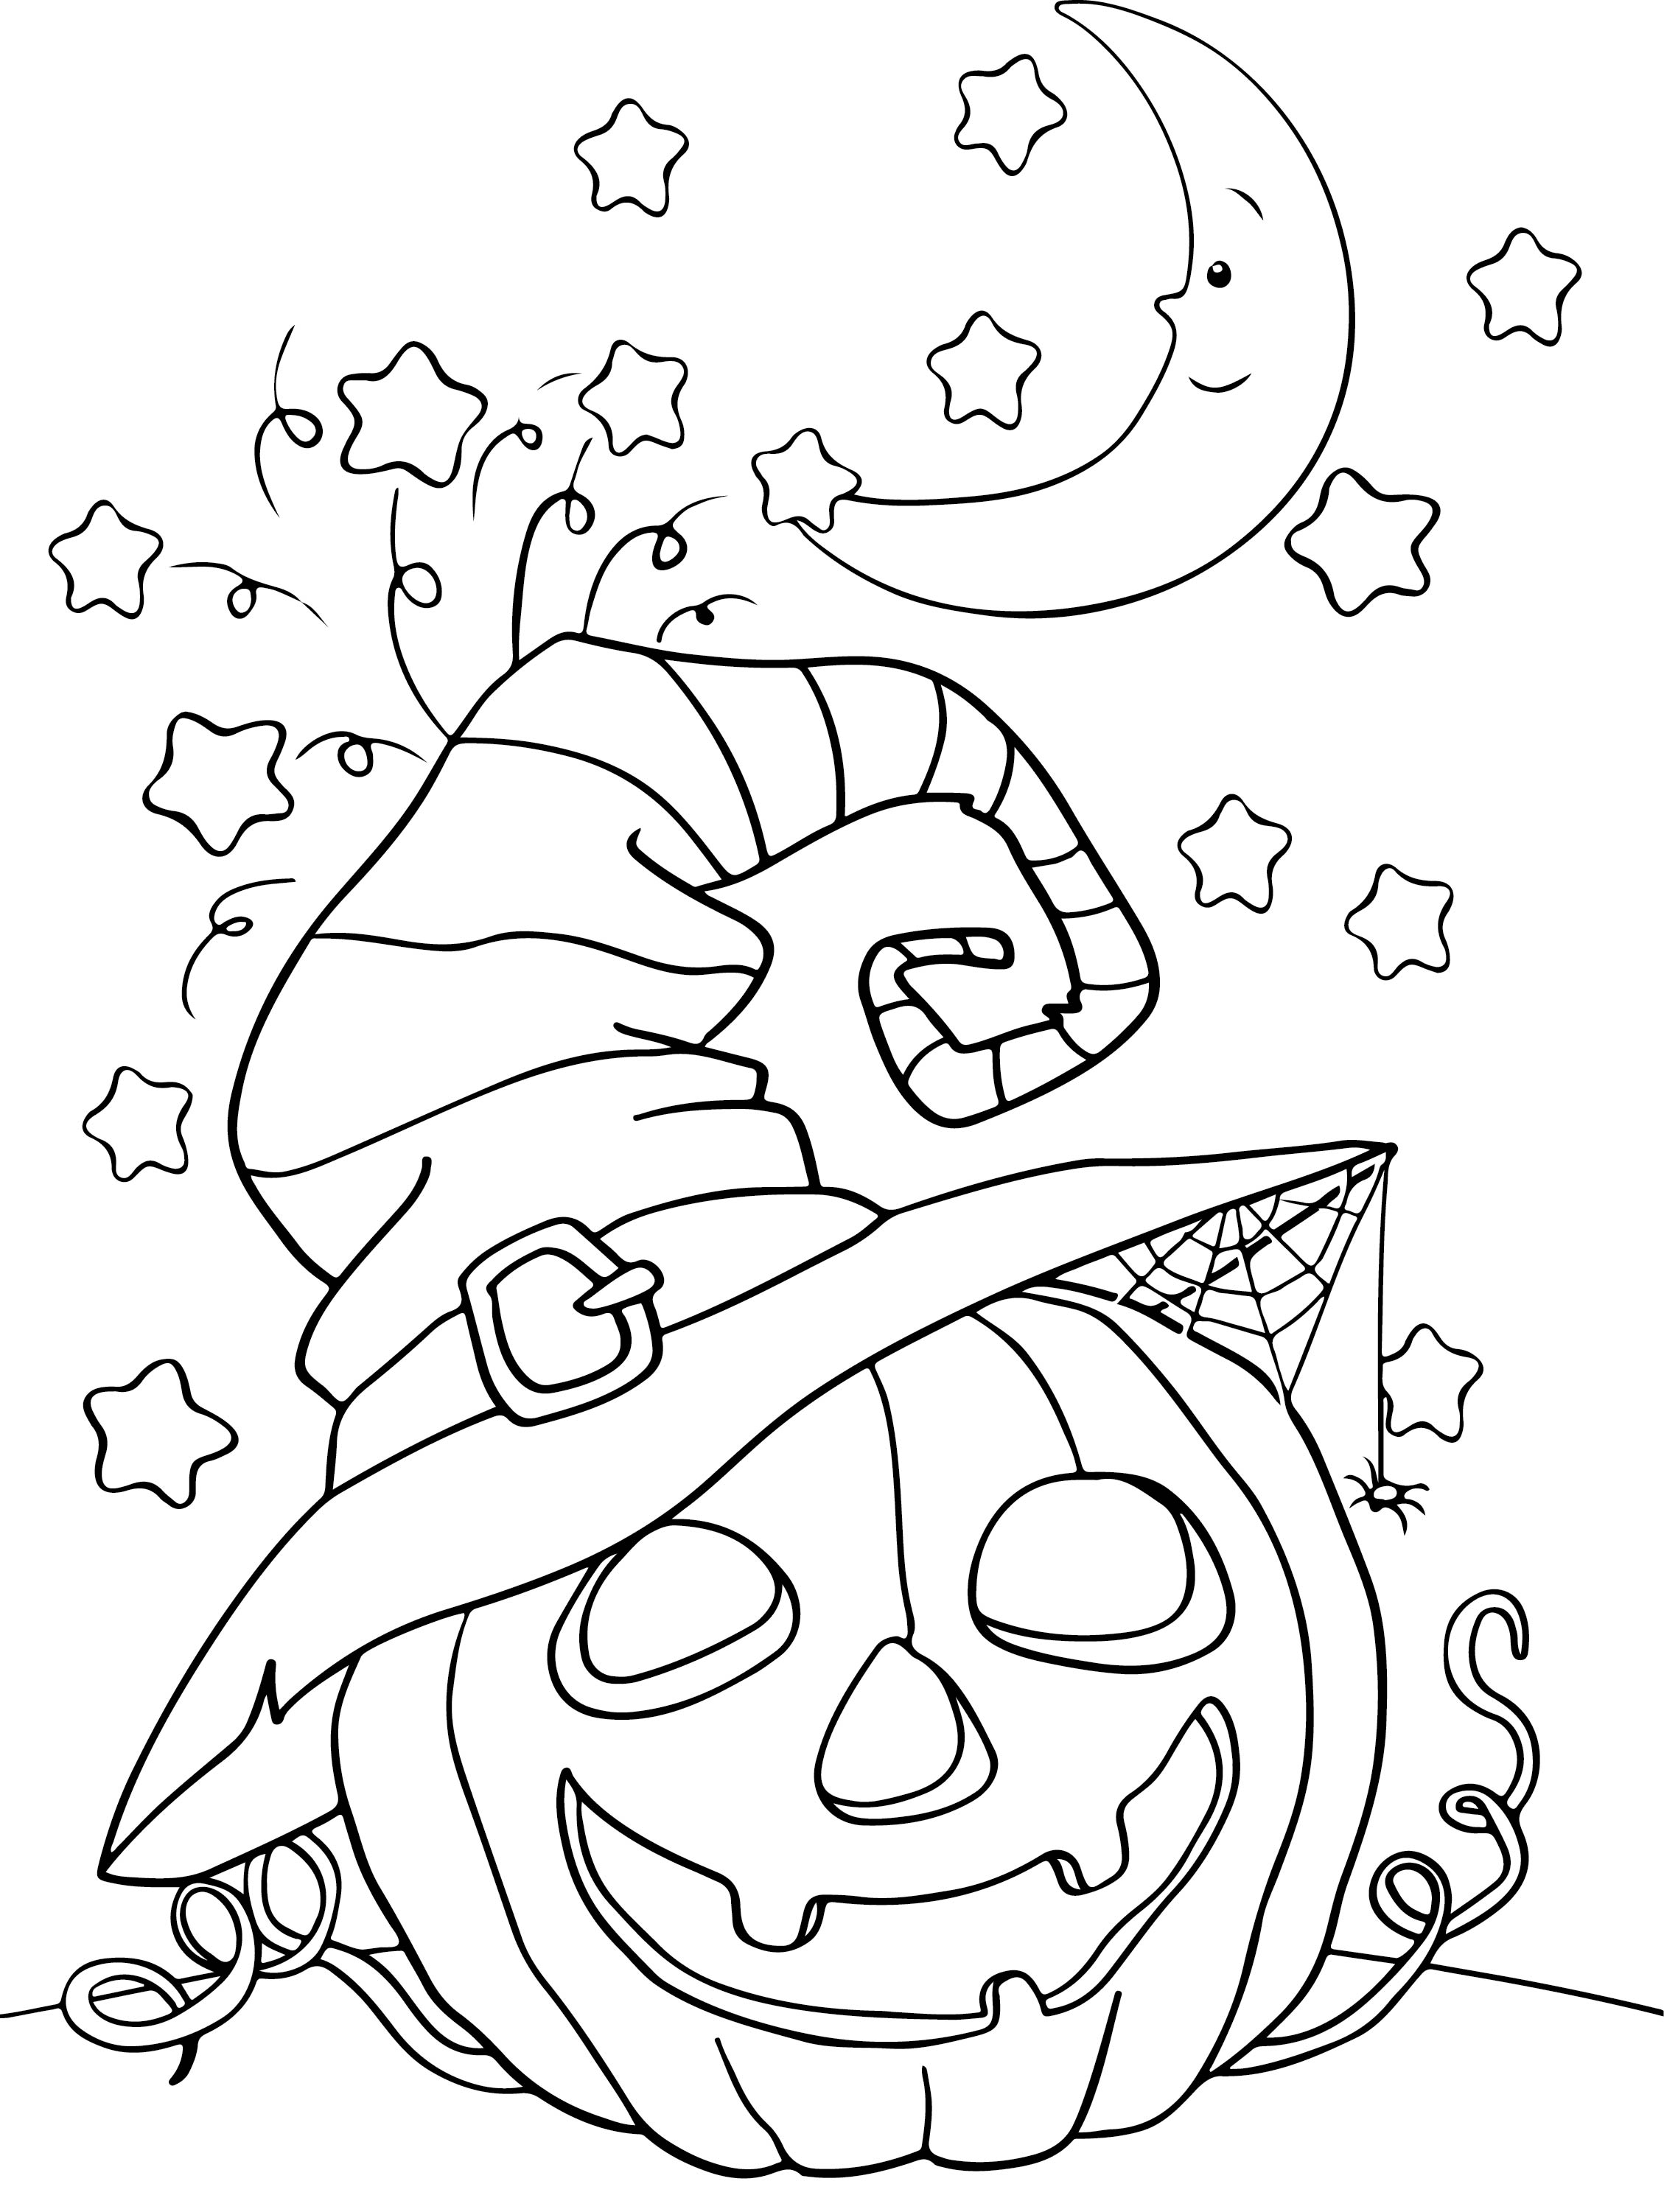  Halloween Coloring Pages For Teachers Free Download Gmbar co